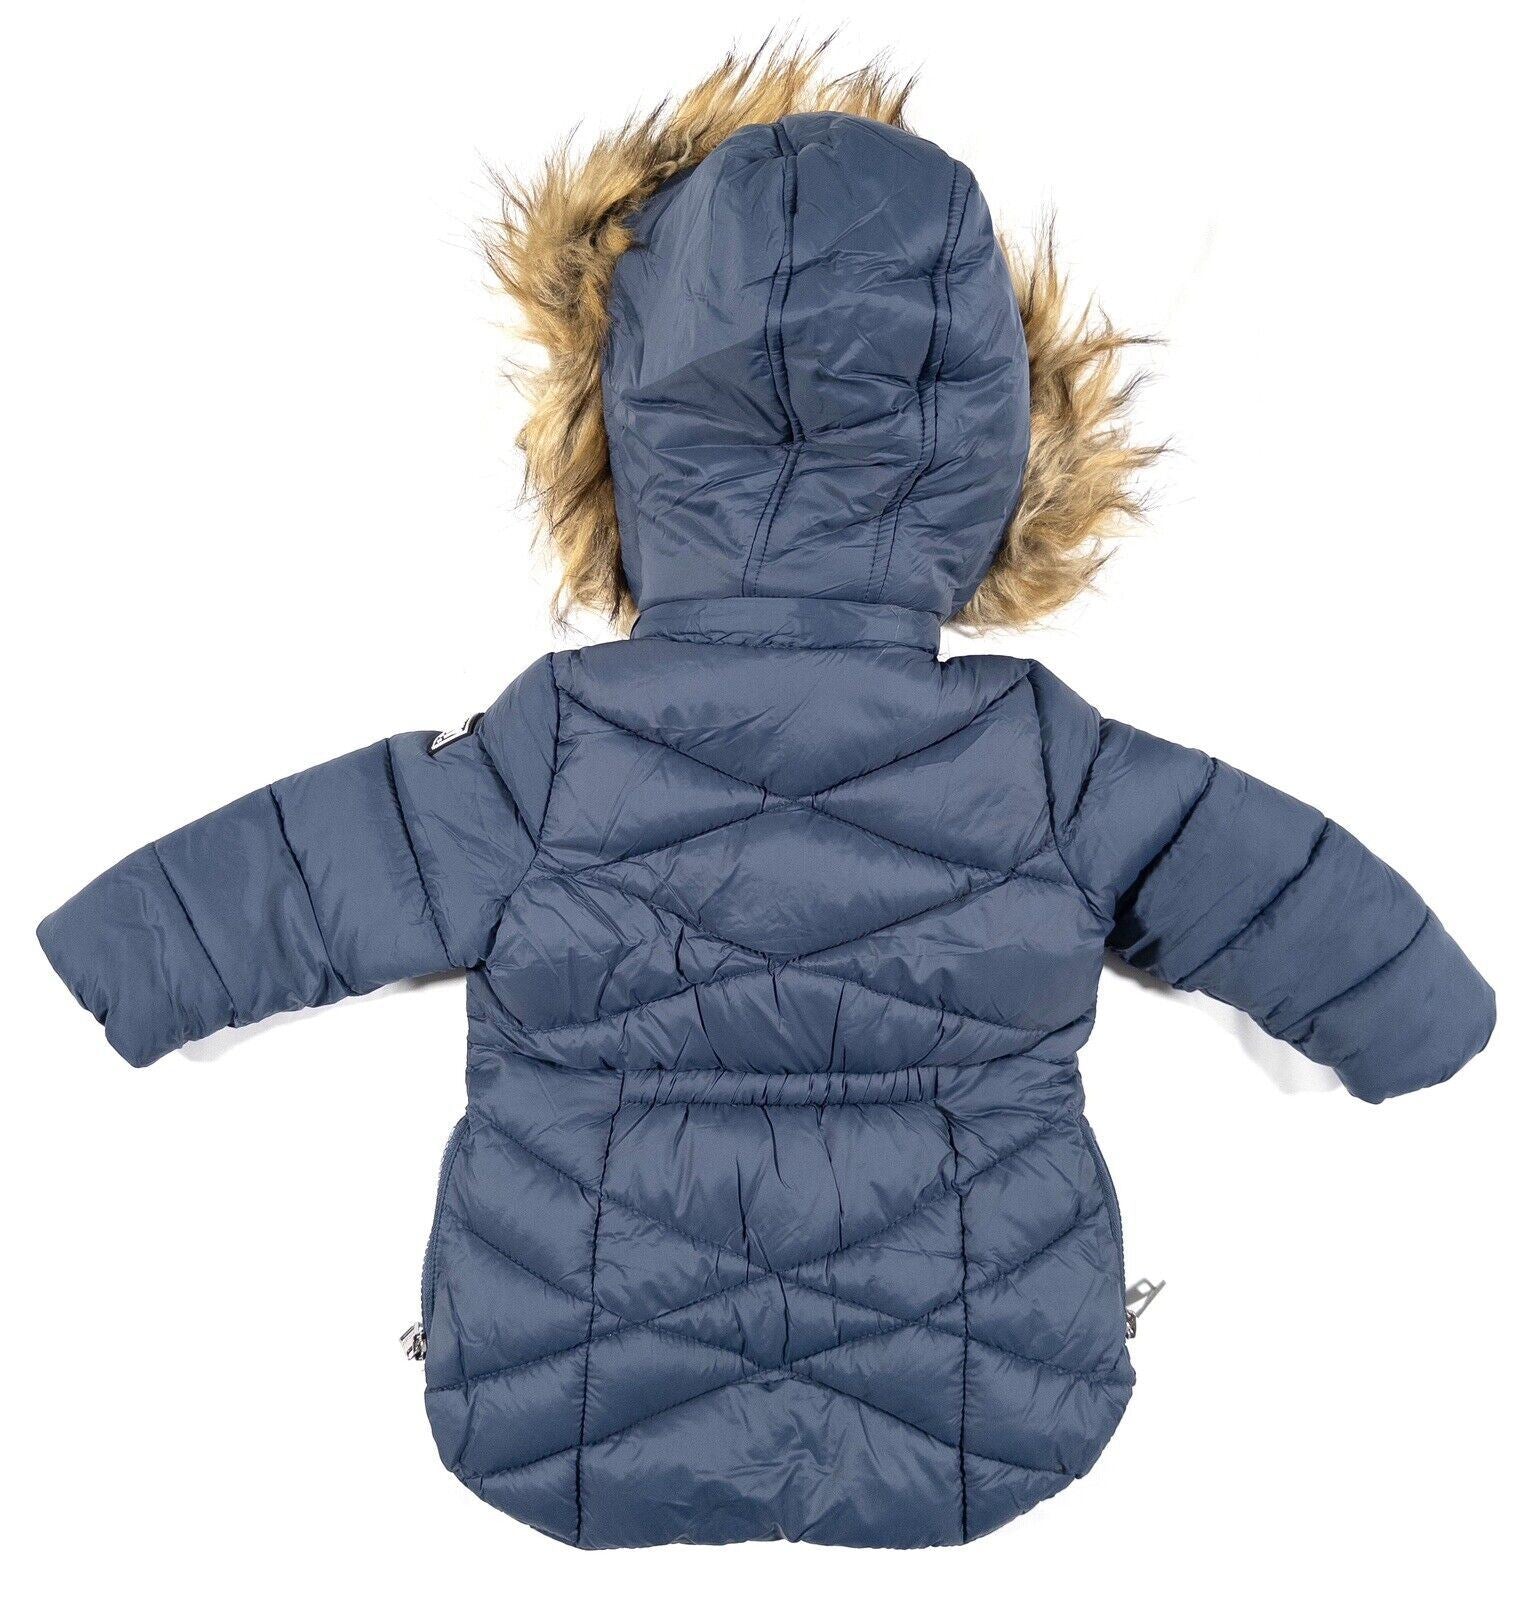 DKNY JEANS Baby Girls Blue Hooded Coat Size UK 12 Months